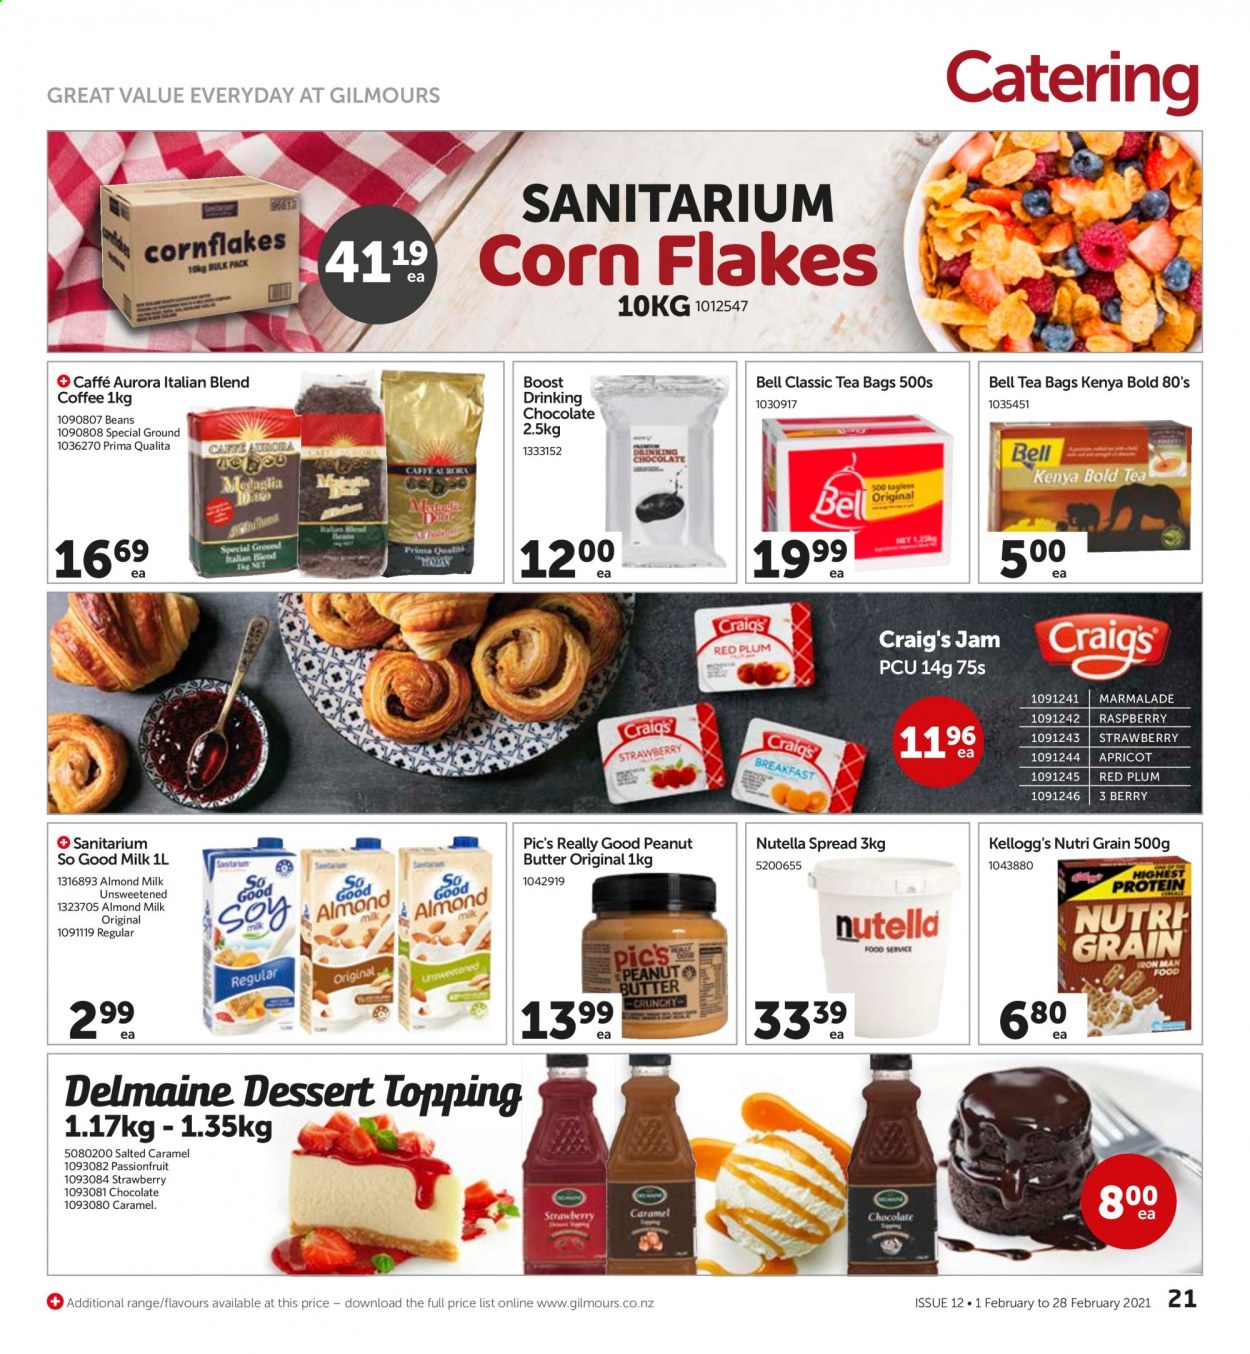 thumbnail - Gilmours mailer - 01.02.2021 - 28.02.2021 - Sales products - red plums, beans, Delmaine, almond milk, Nutella, chocolate, Kellogg's, topping, corn flakes, Nutri-Grain, fruit jam, peanut butter, chocolate drink, Boost, tea bags, coffee. Page 21.